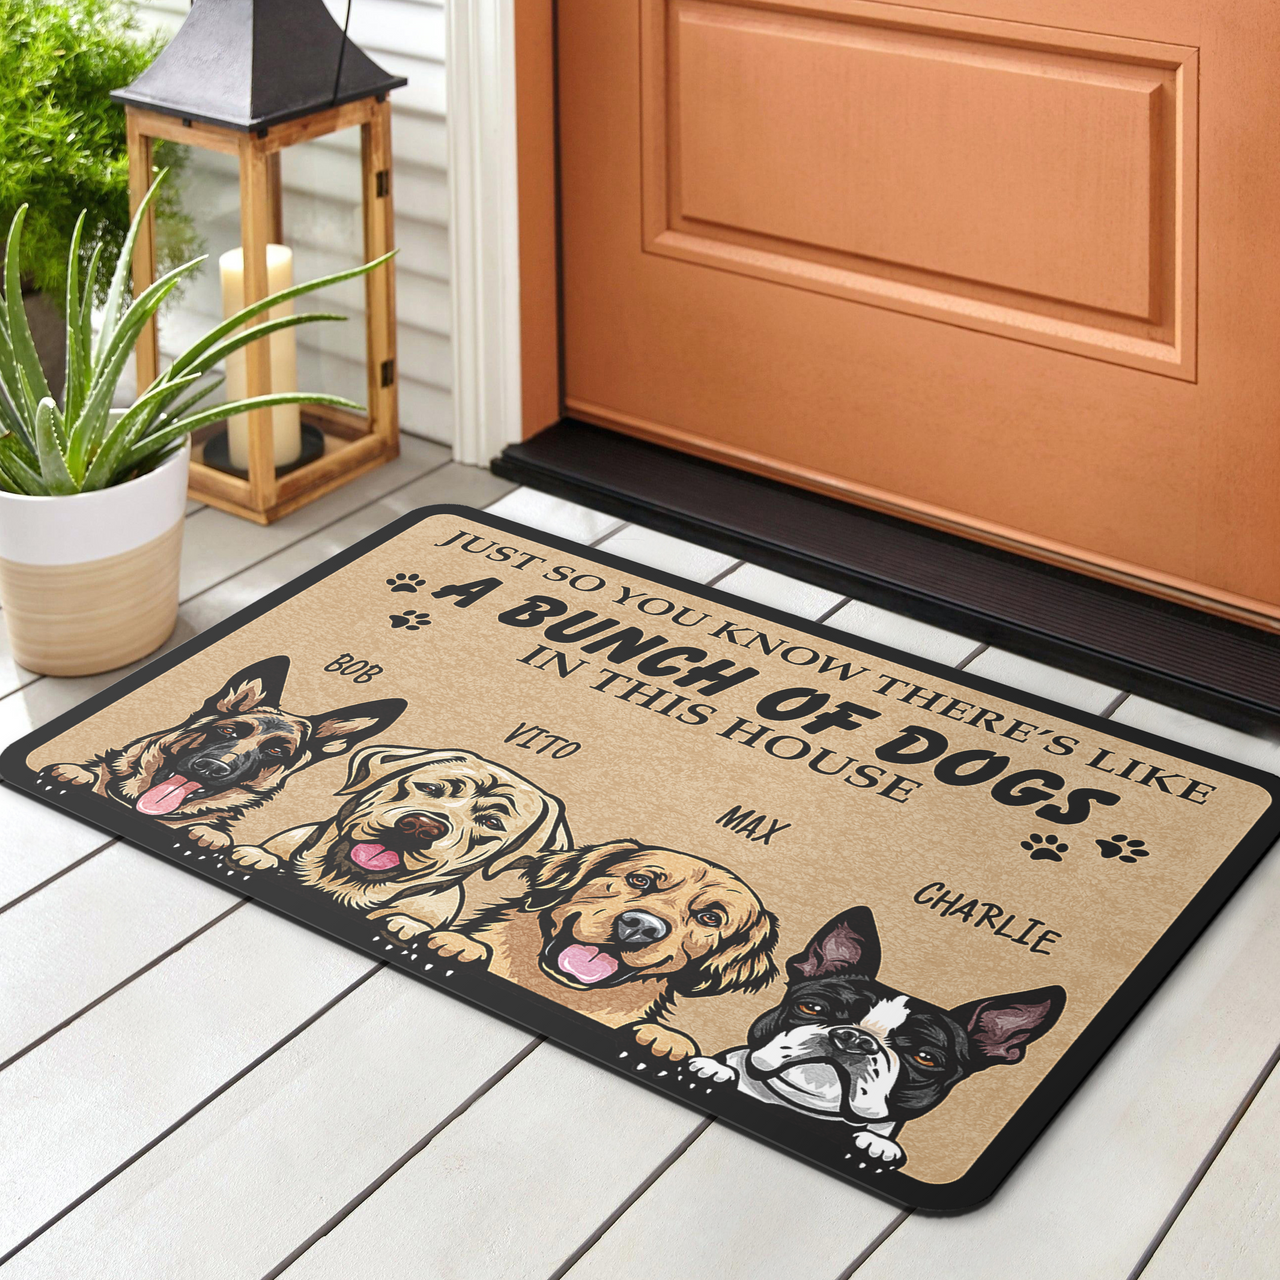 A Bunch Of Dogs In This House - Personalized Dog Doormat AB